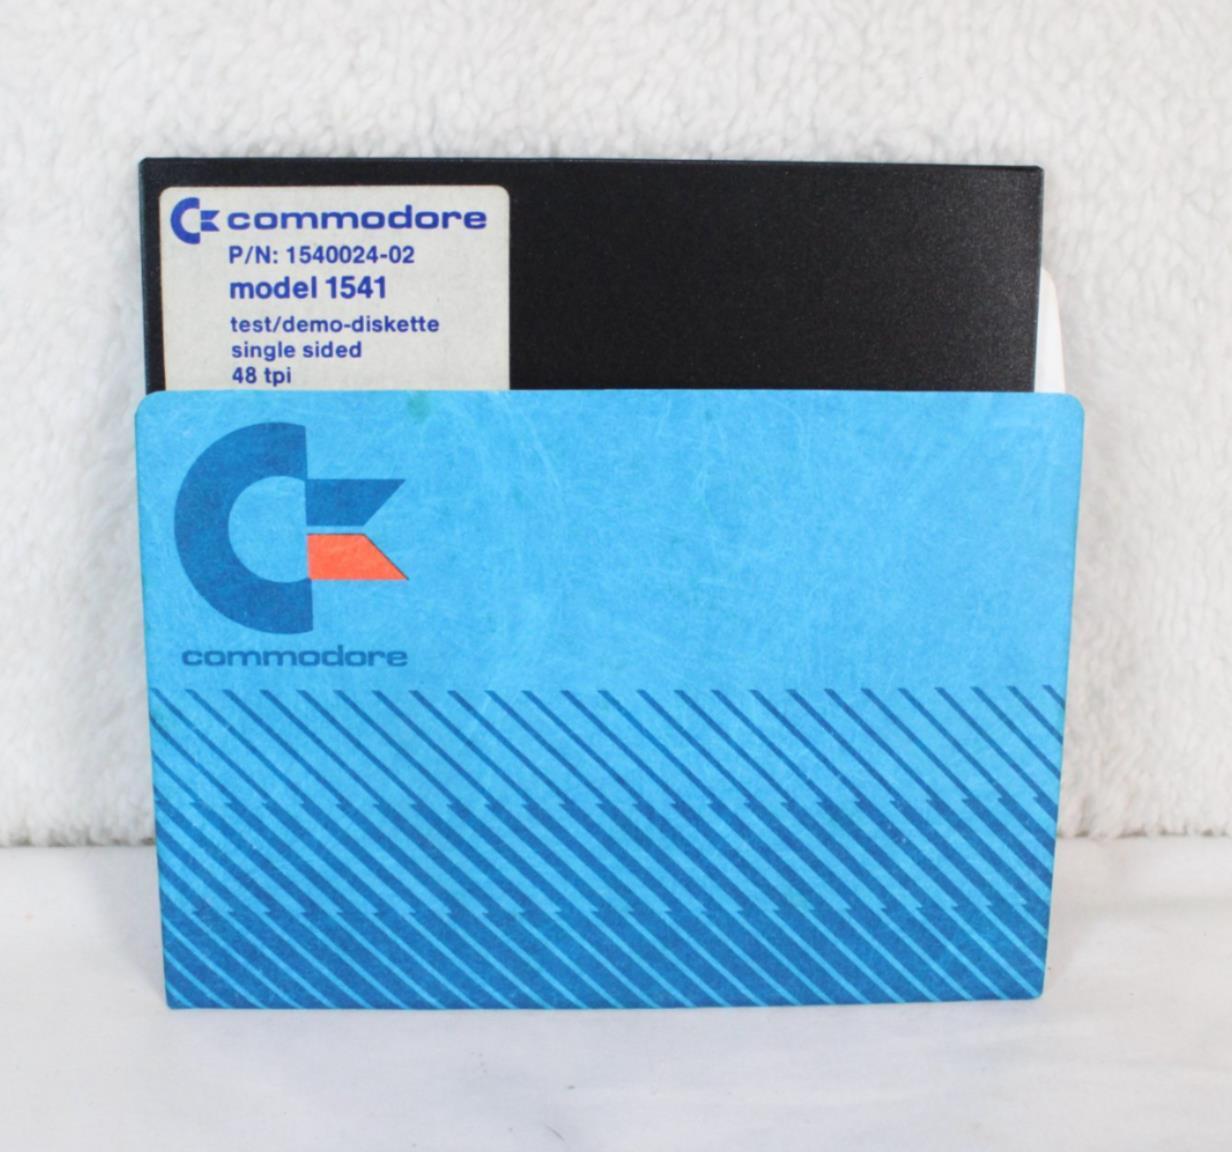 Commodore Model 1541 1540024-02 Test/Demo Diskette Single Side Floppy Disk A269